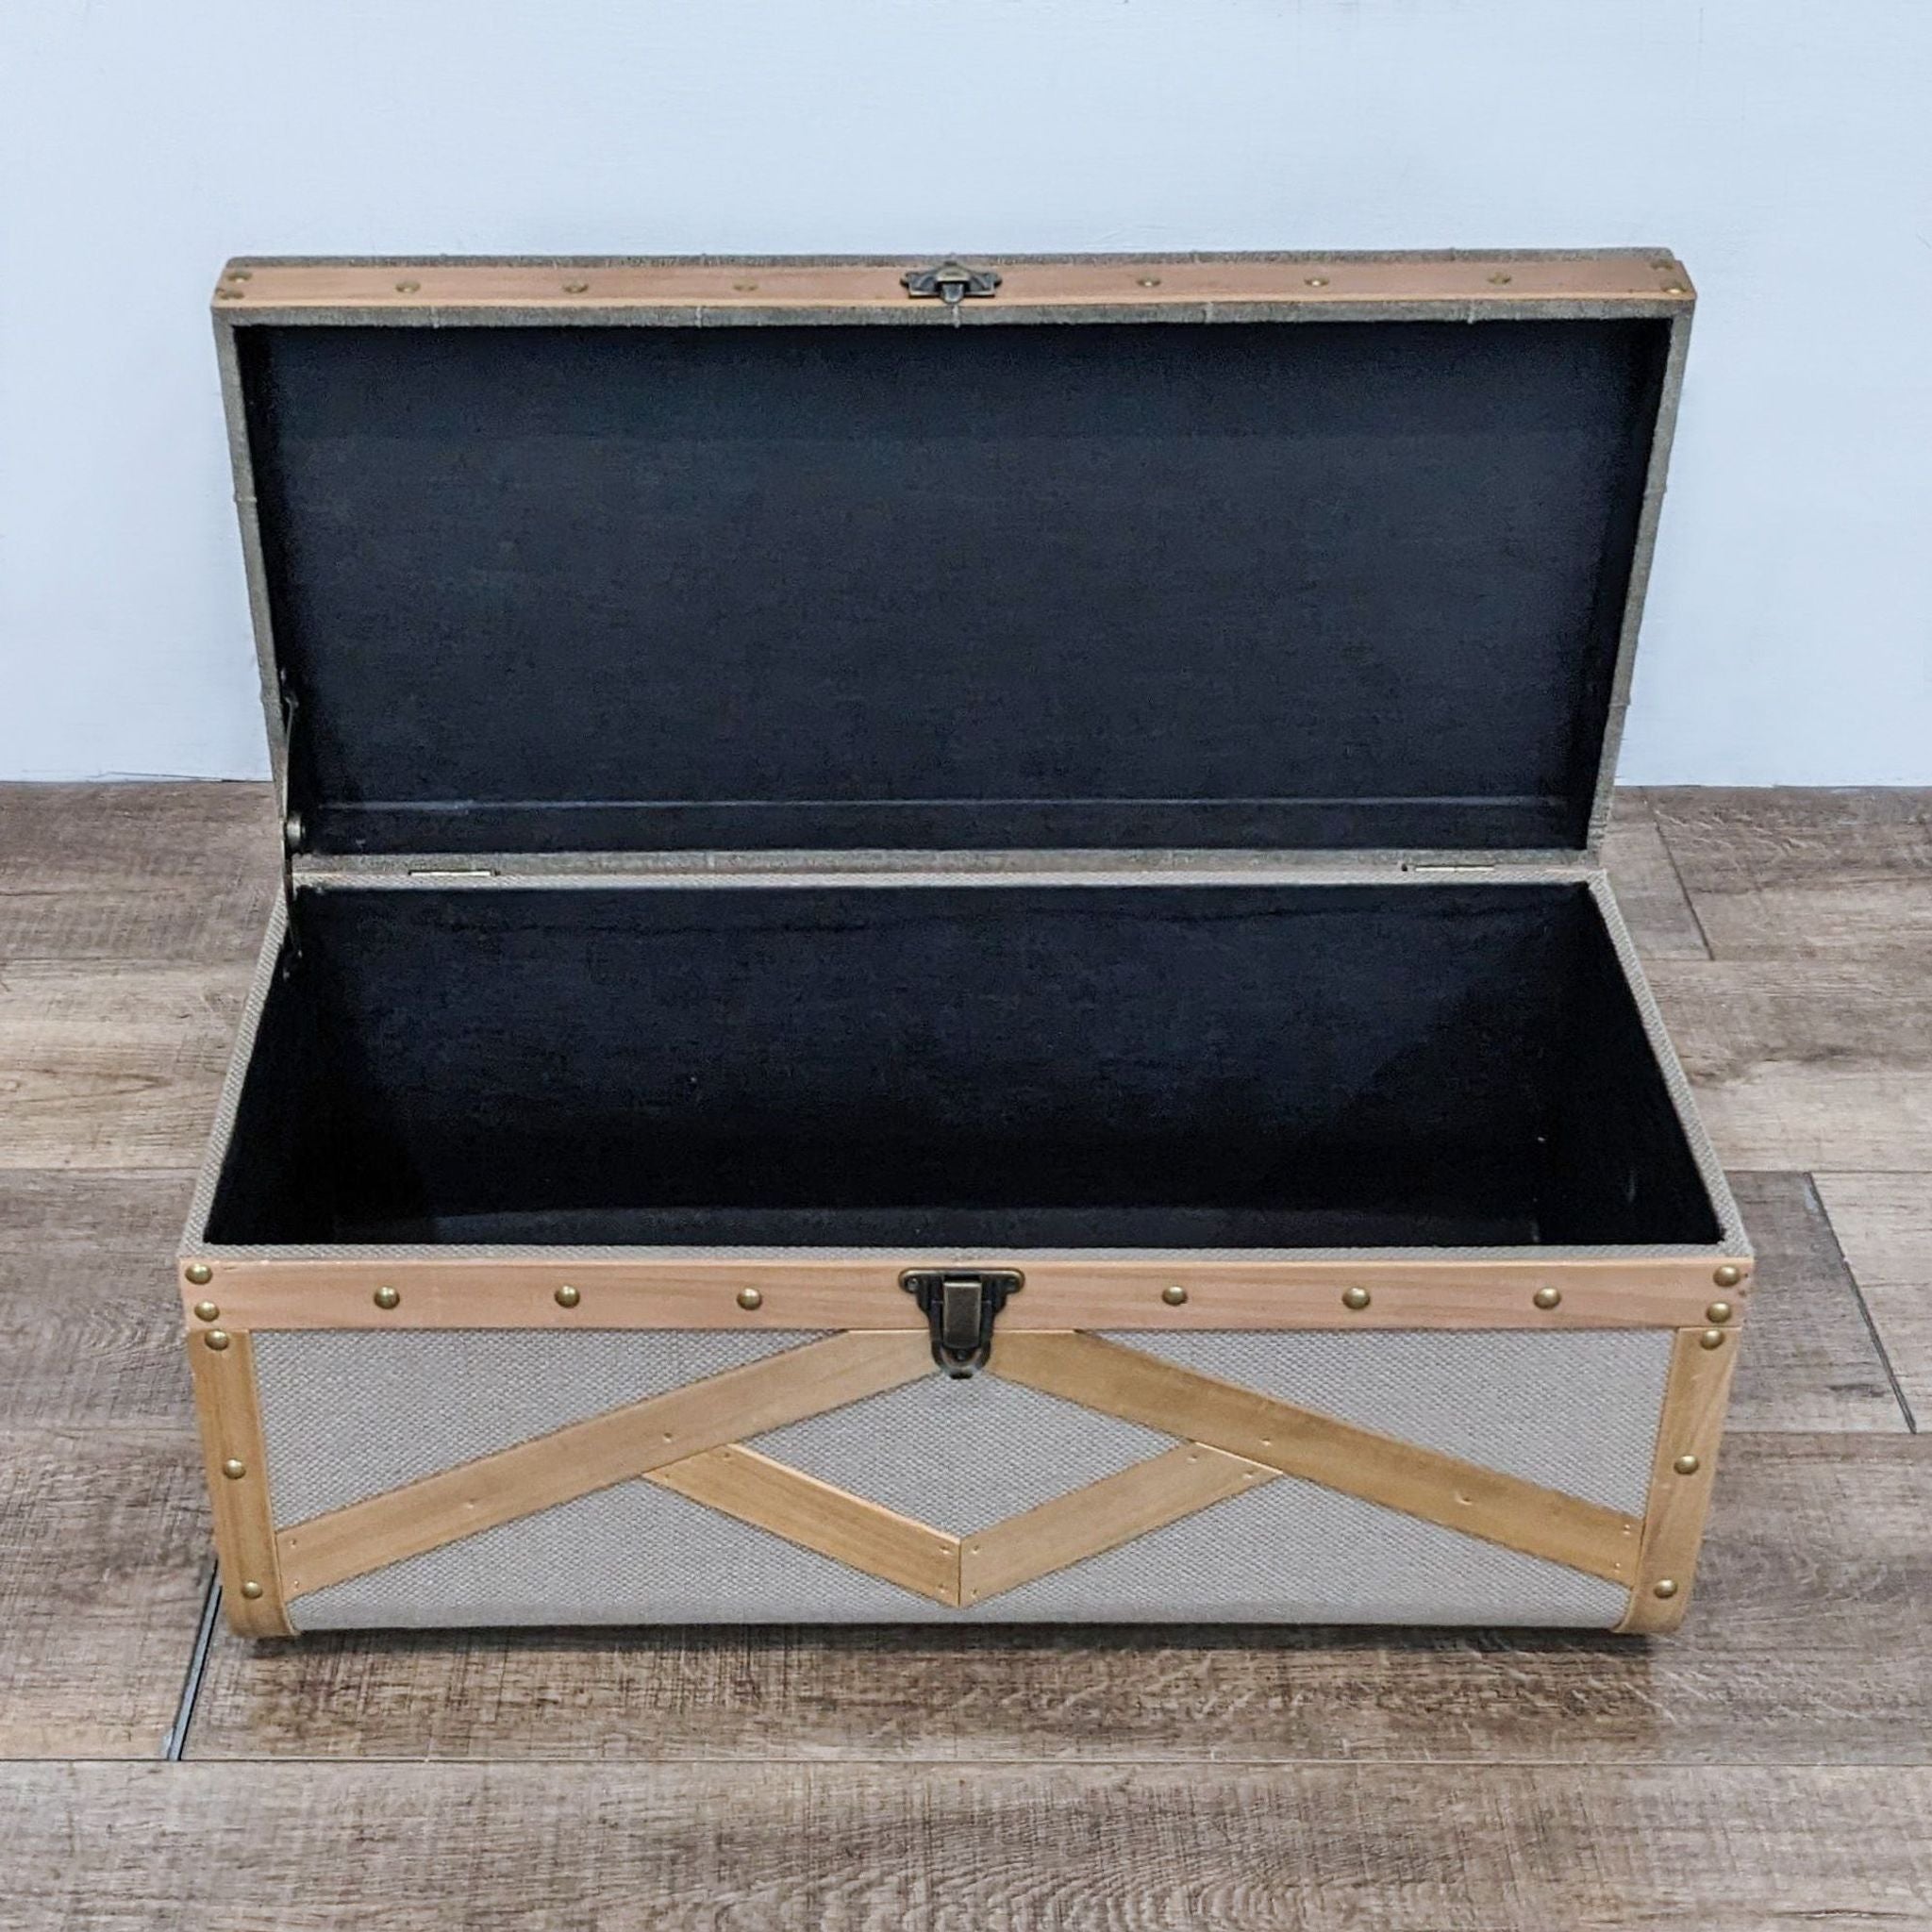 Open Reperch fabric storage trunk showing black interior, with brass and wood detailing.